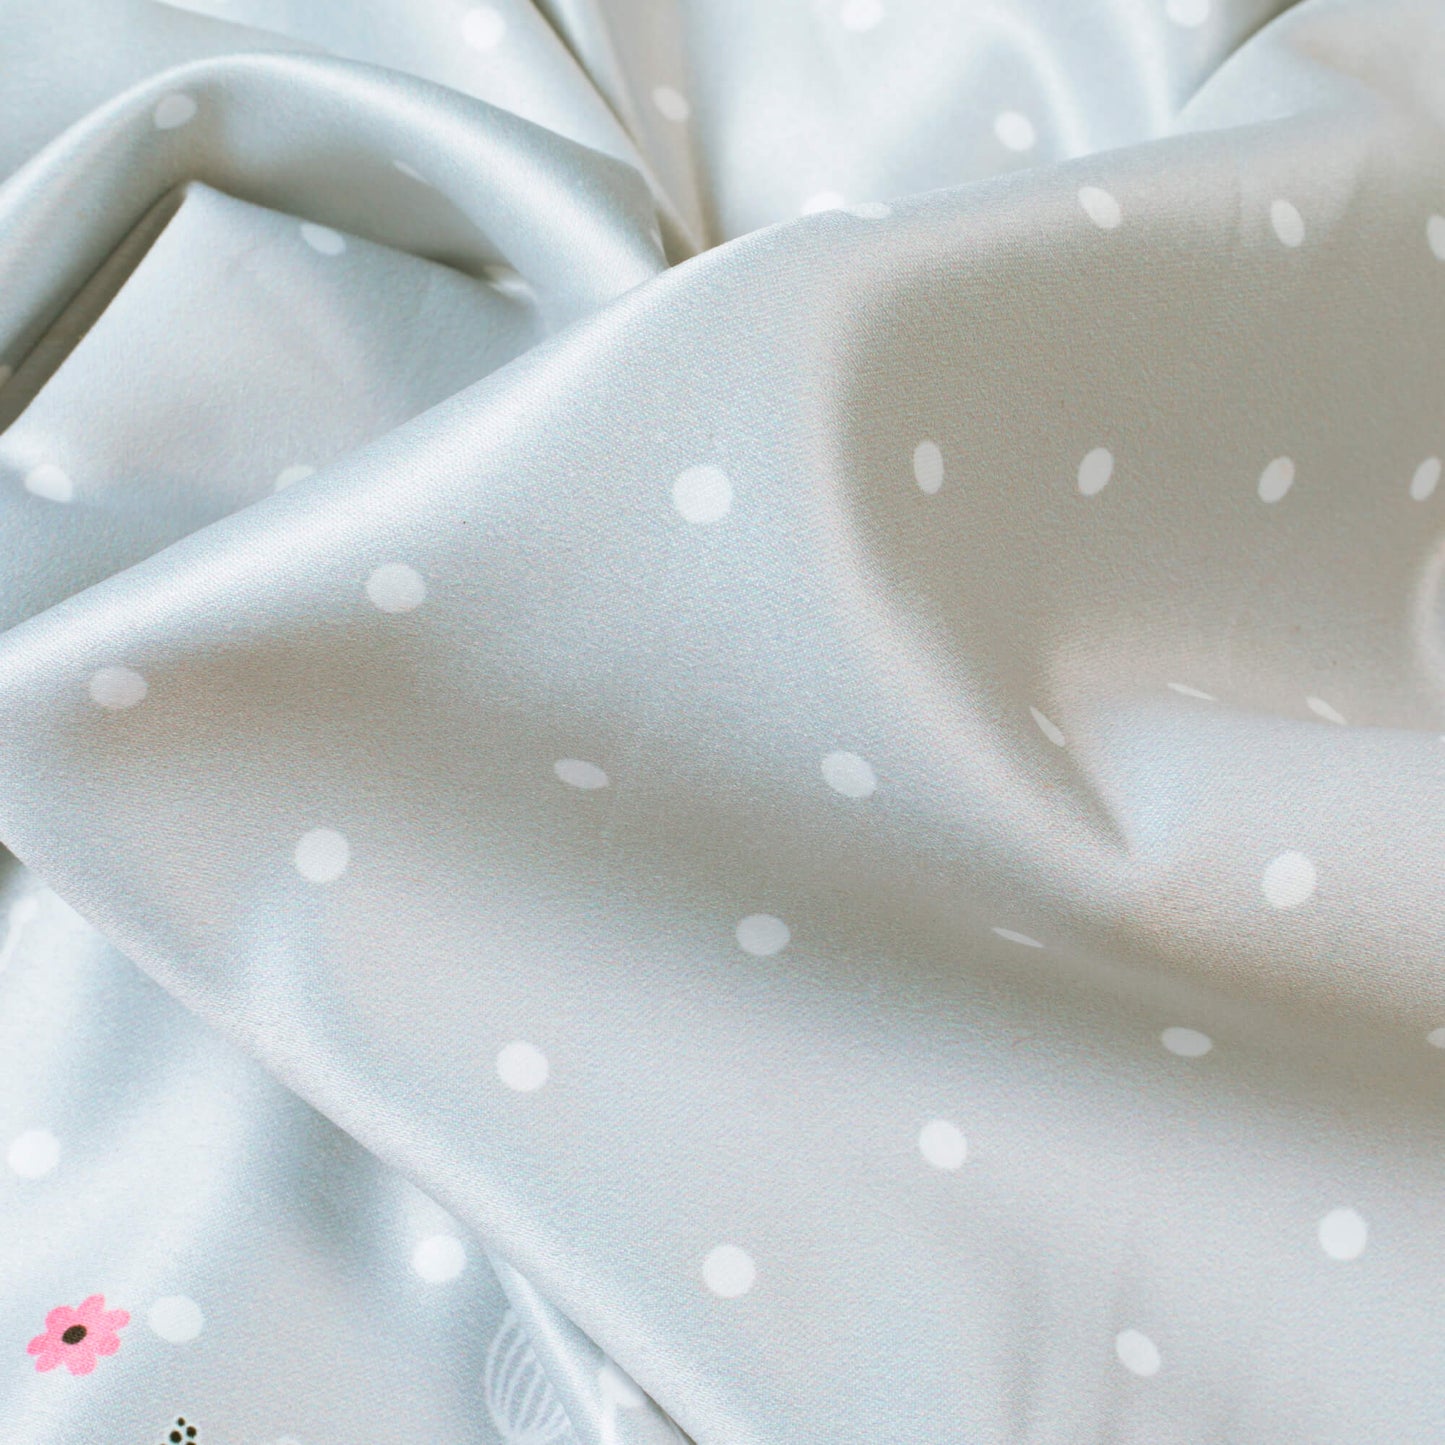 Pewter Grey And Peach Polka Dots Pattern Digital Print Heavy Satin Fabric (Width 58 Inches)